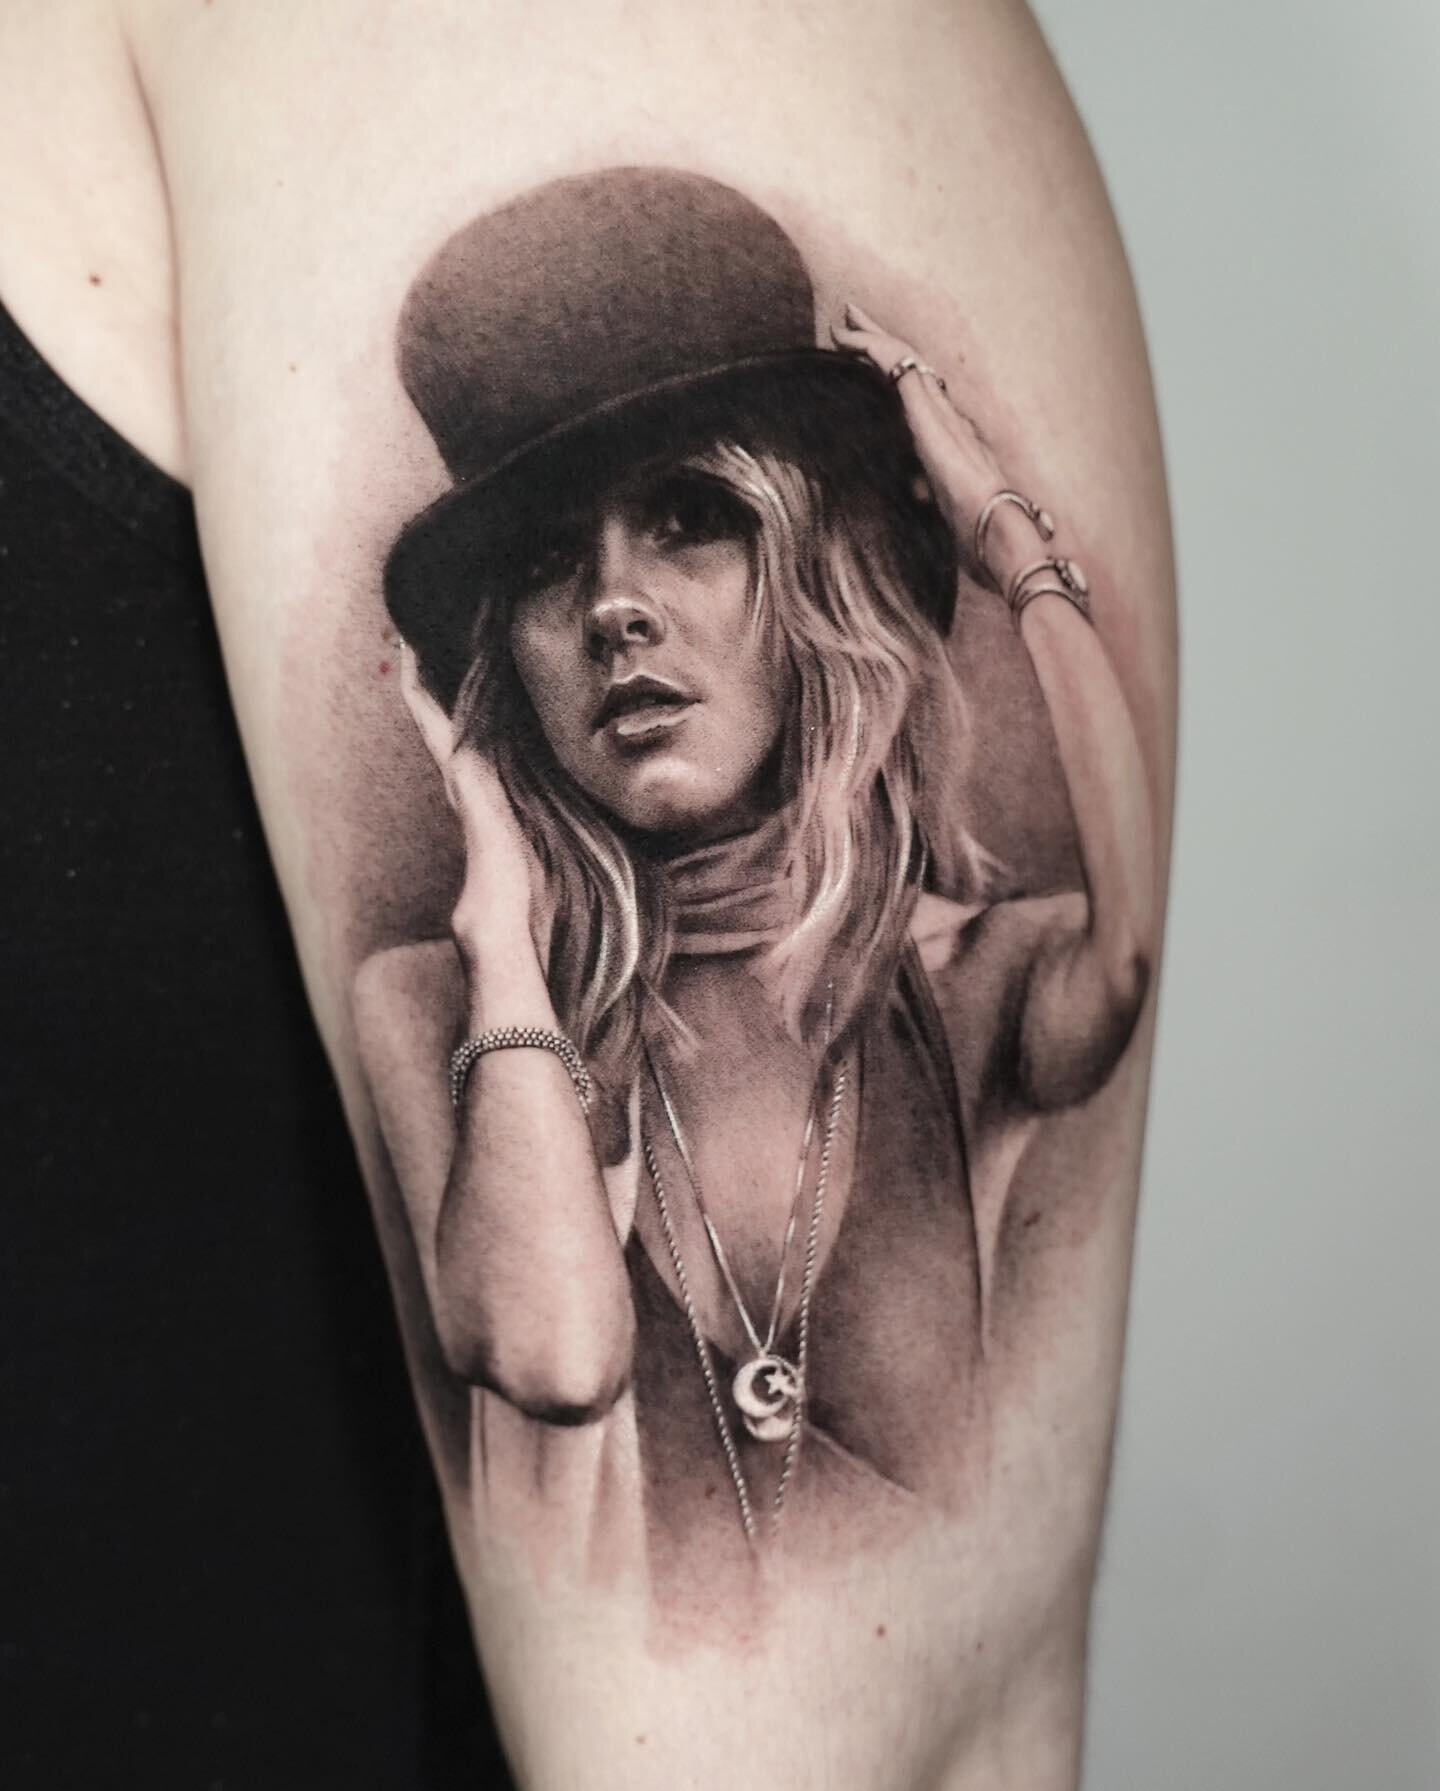 A little more Stevie 🖤
These pictures are from the camera (reel was made with my phone)

6h

#tattoo #portraittattoo #stevienicks #legend #photorealism #nyctattoo #fleetwoodmac #besttattoo #musictattoo #goldy #inked #skinart